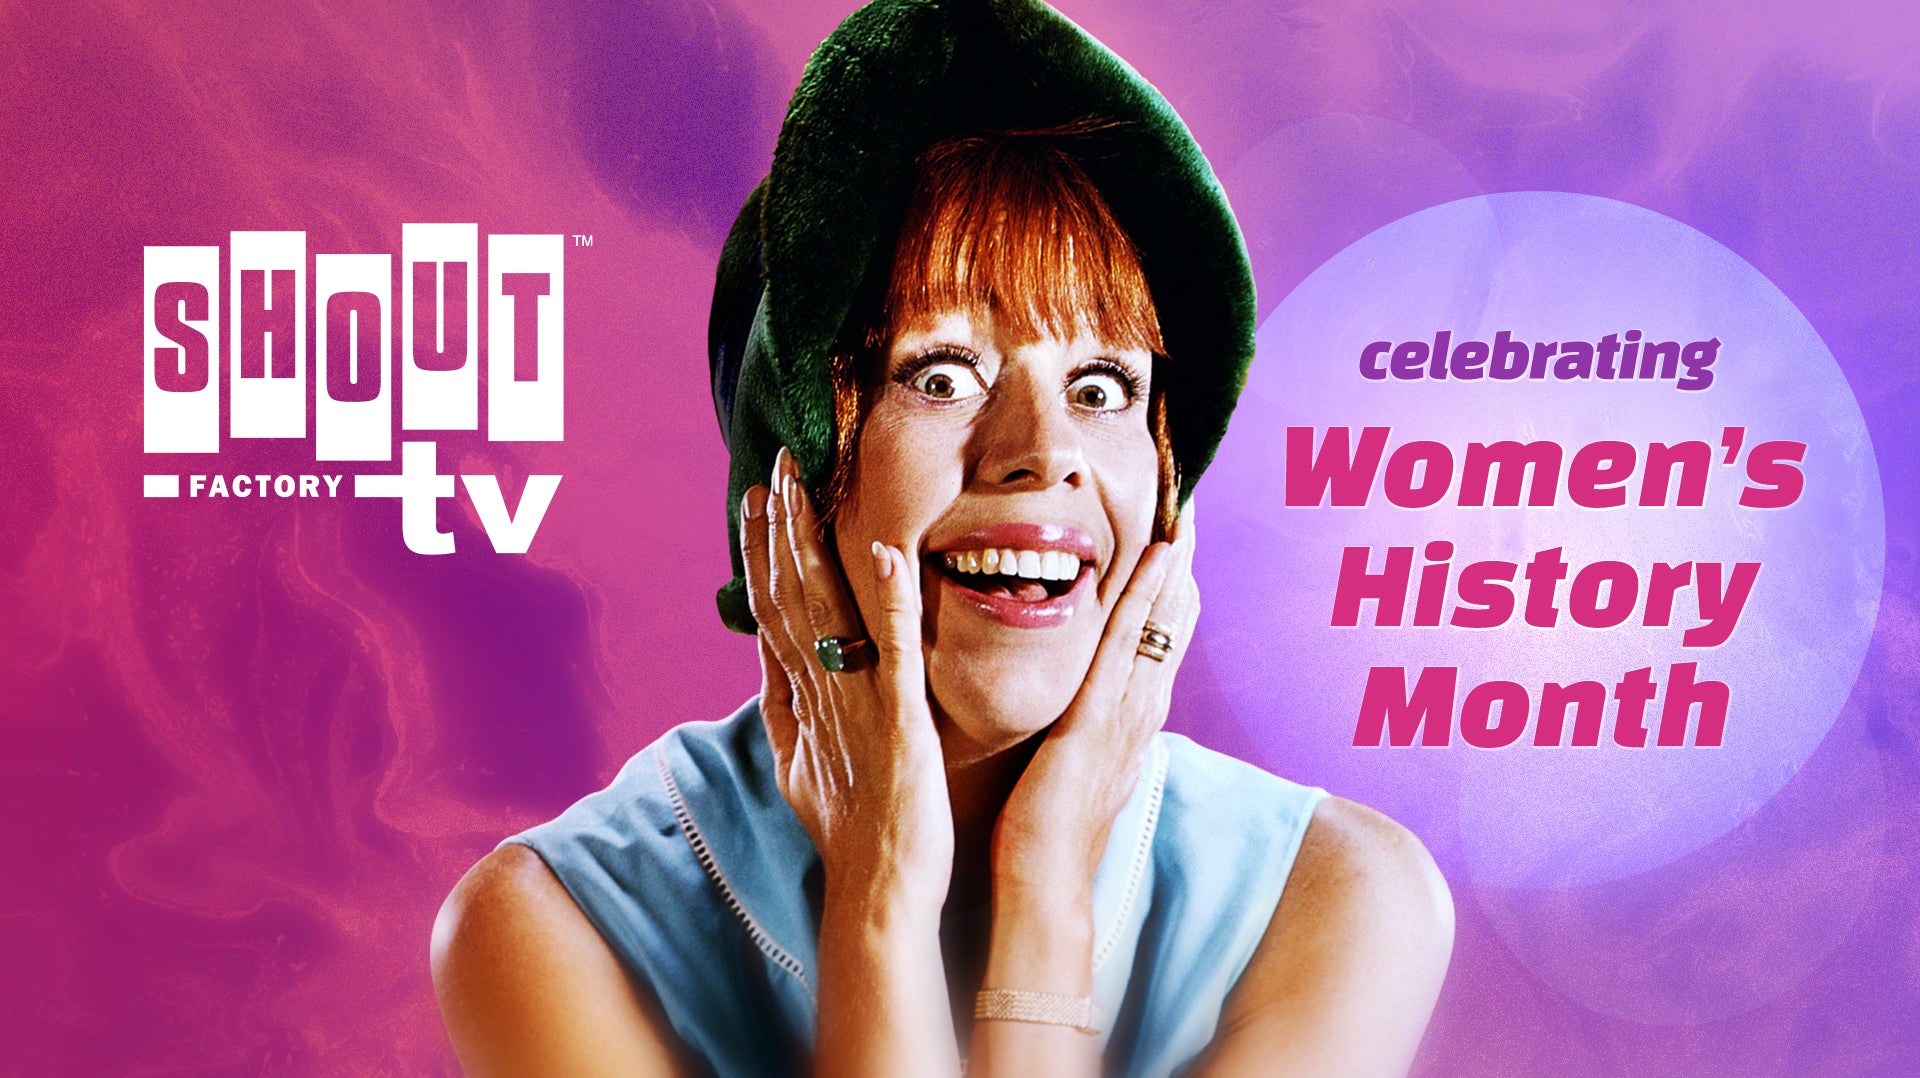 Celebrate Women’s History Month With The Best Of The Carol Burnett Show’s Female Guest Stars!